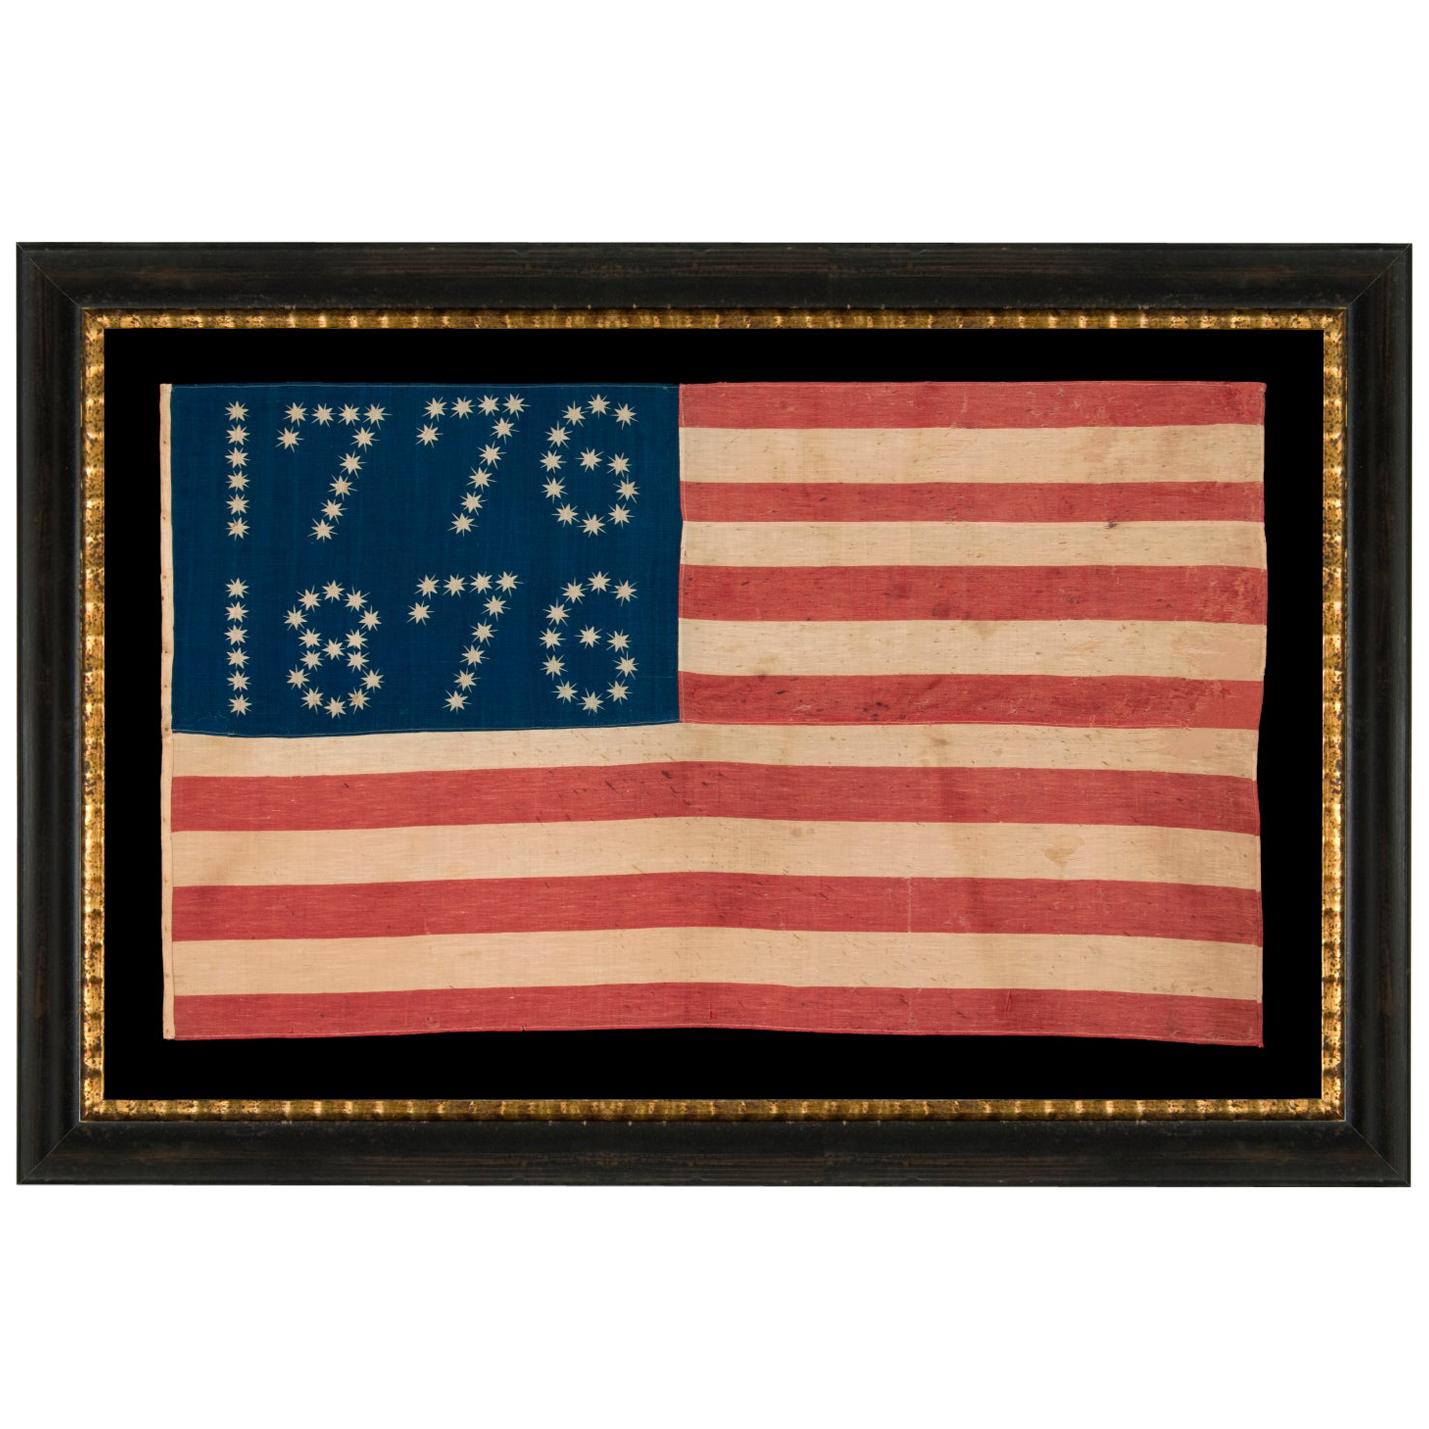 38 Star American Flag, with Stars That Spell "1776-1886" Made for the Centennial